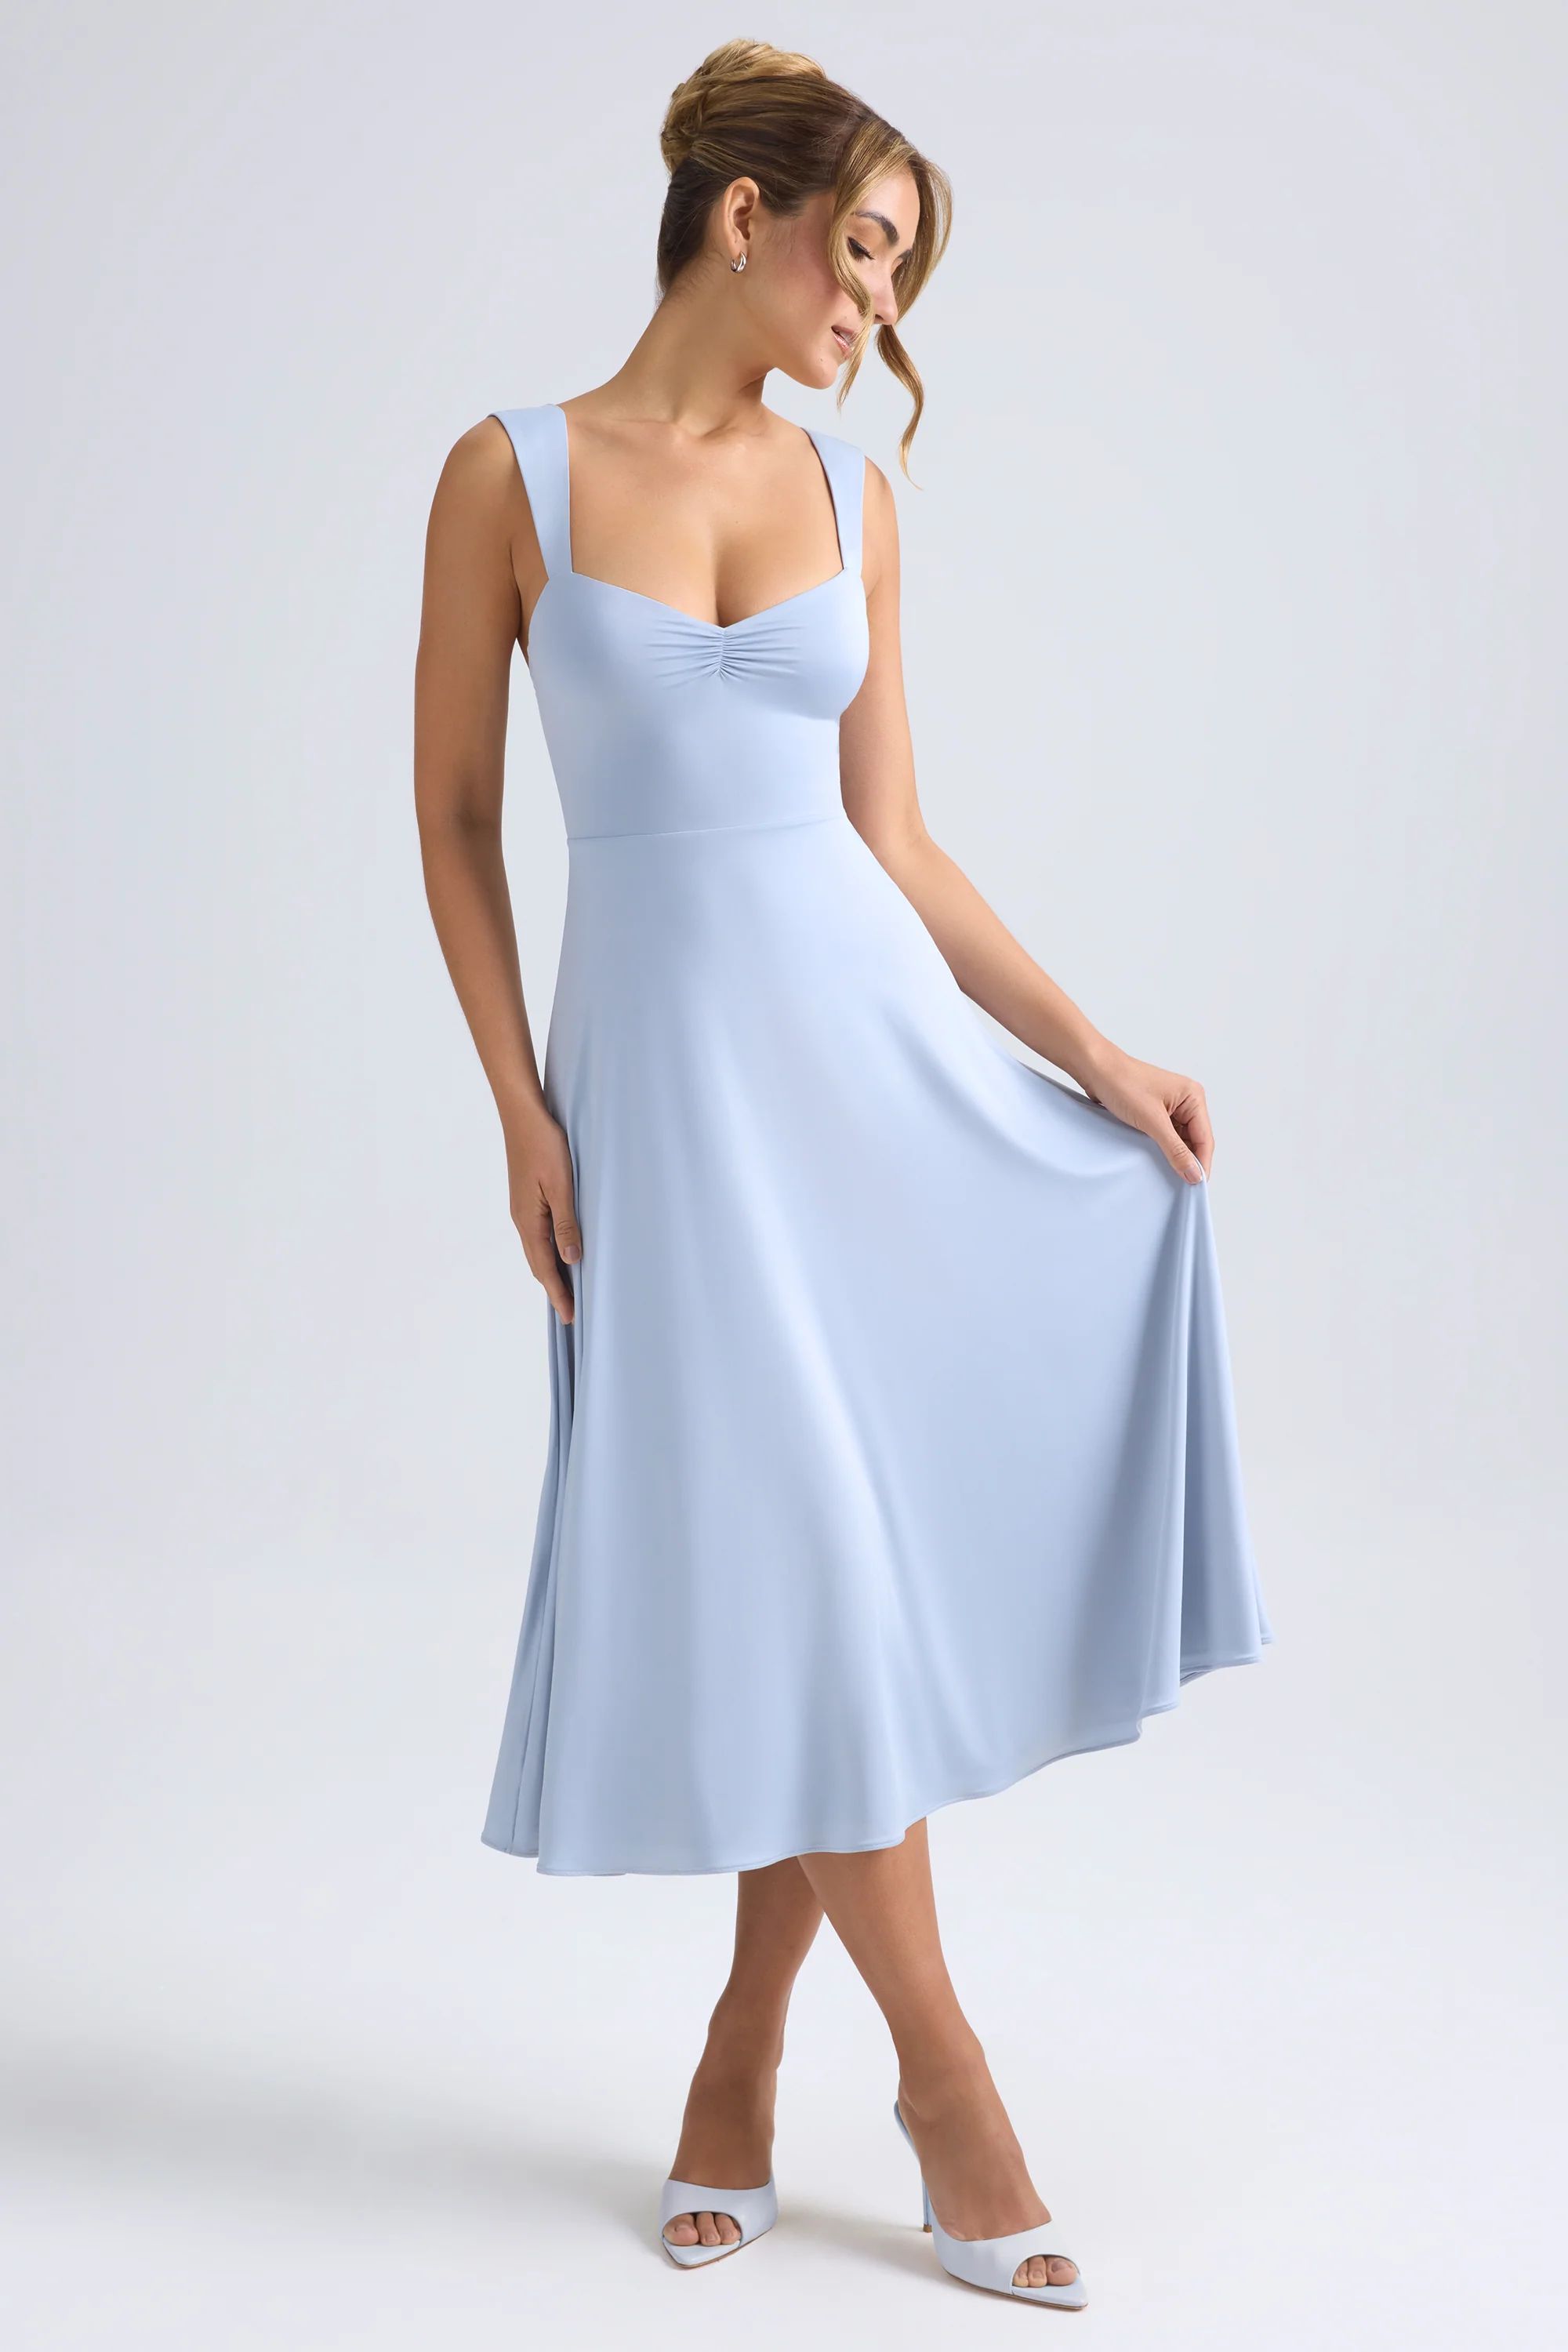 Sweetheart-Neck Ruched Midaxi Dress in Light Blue | Oh Polly